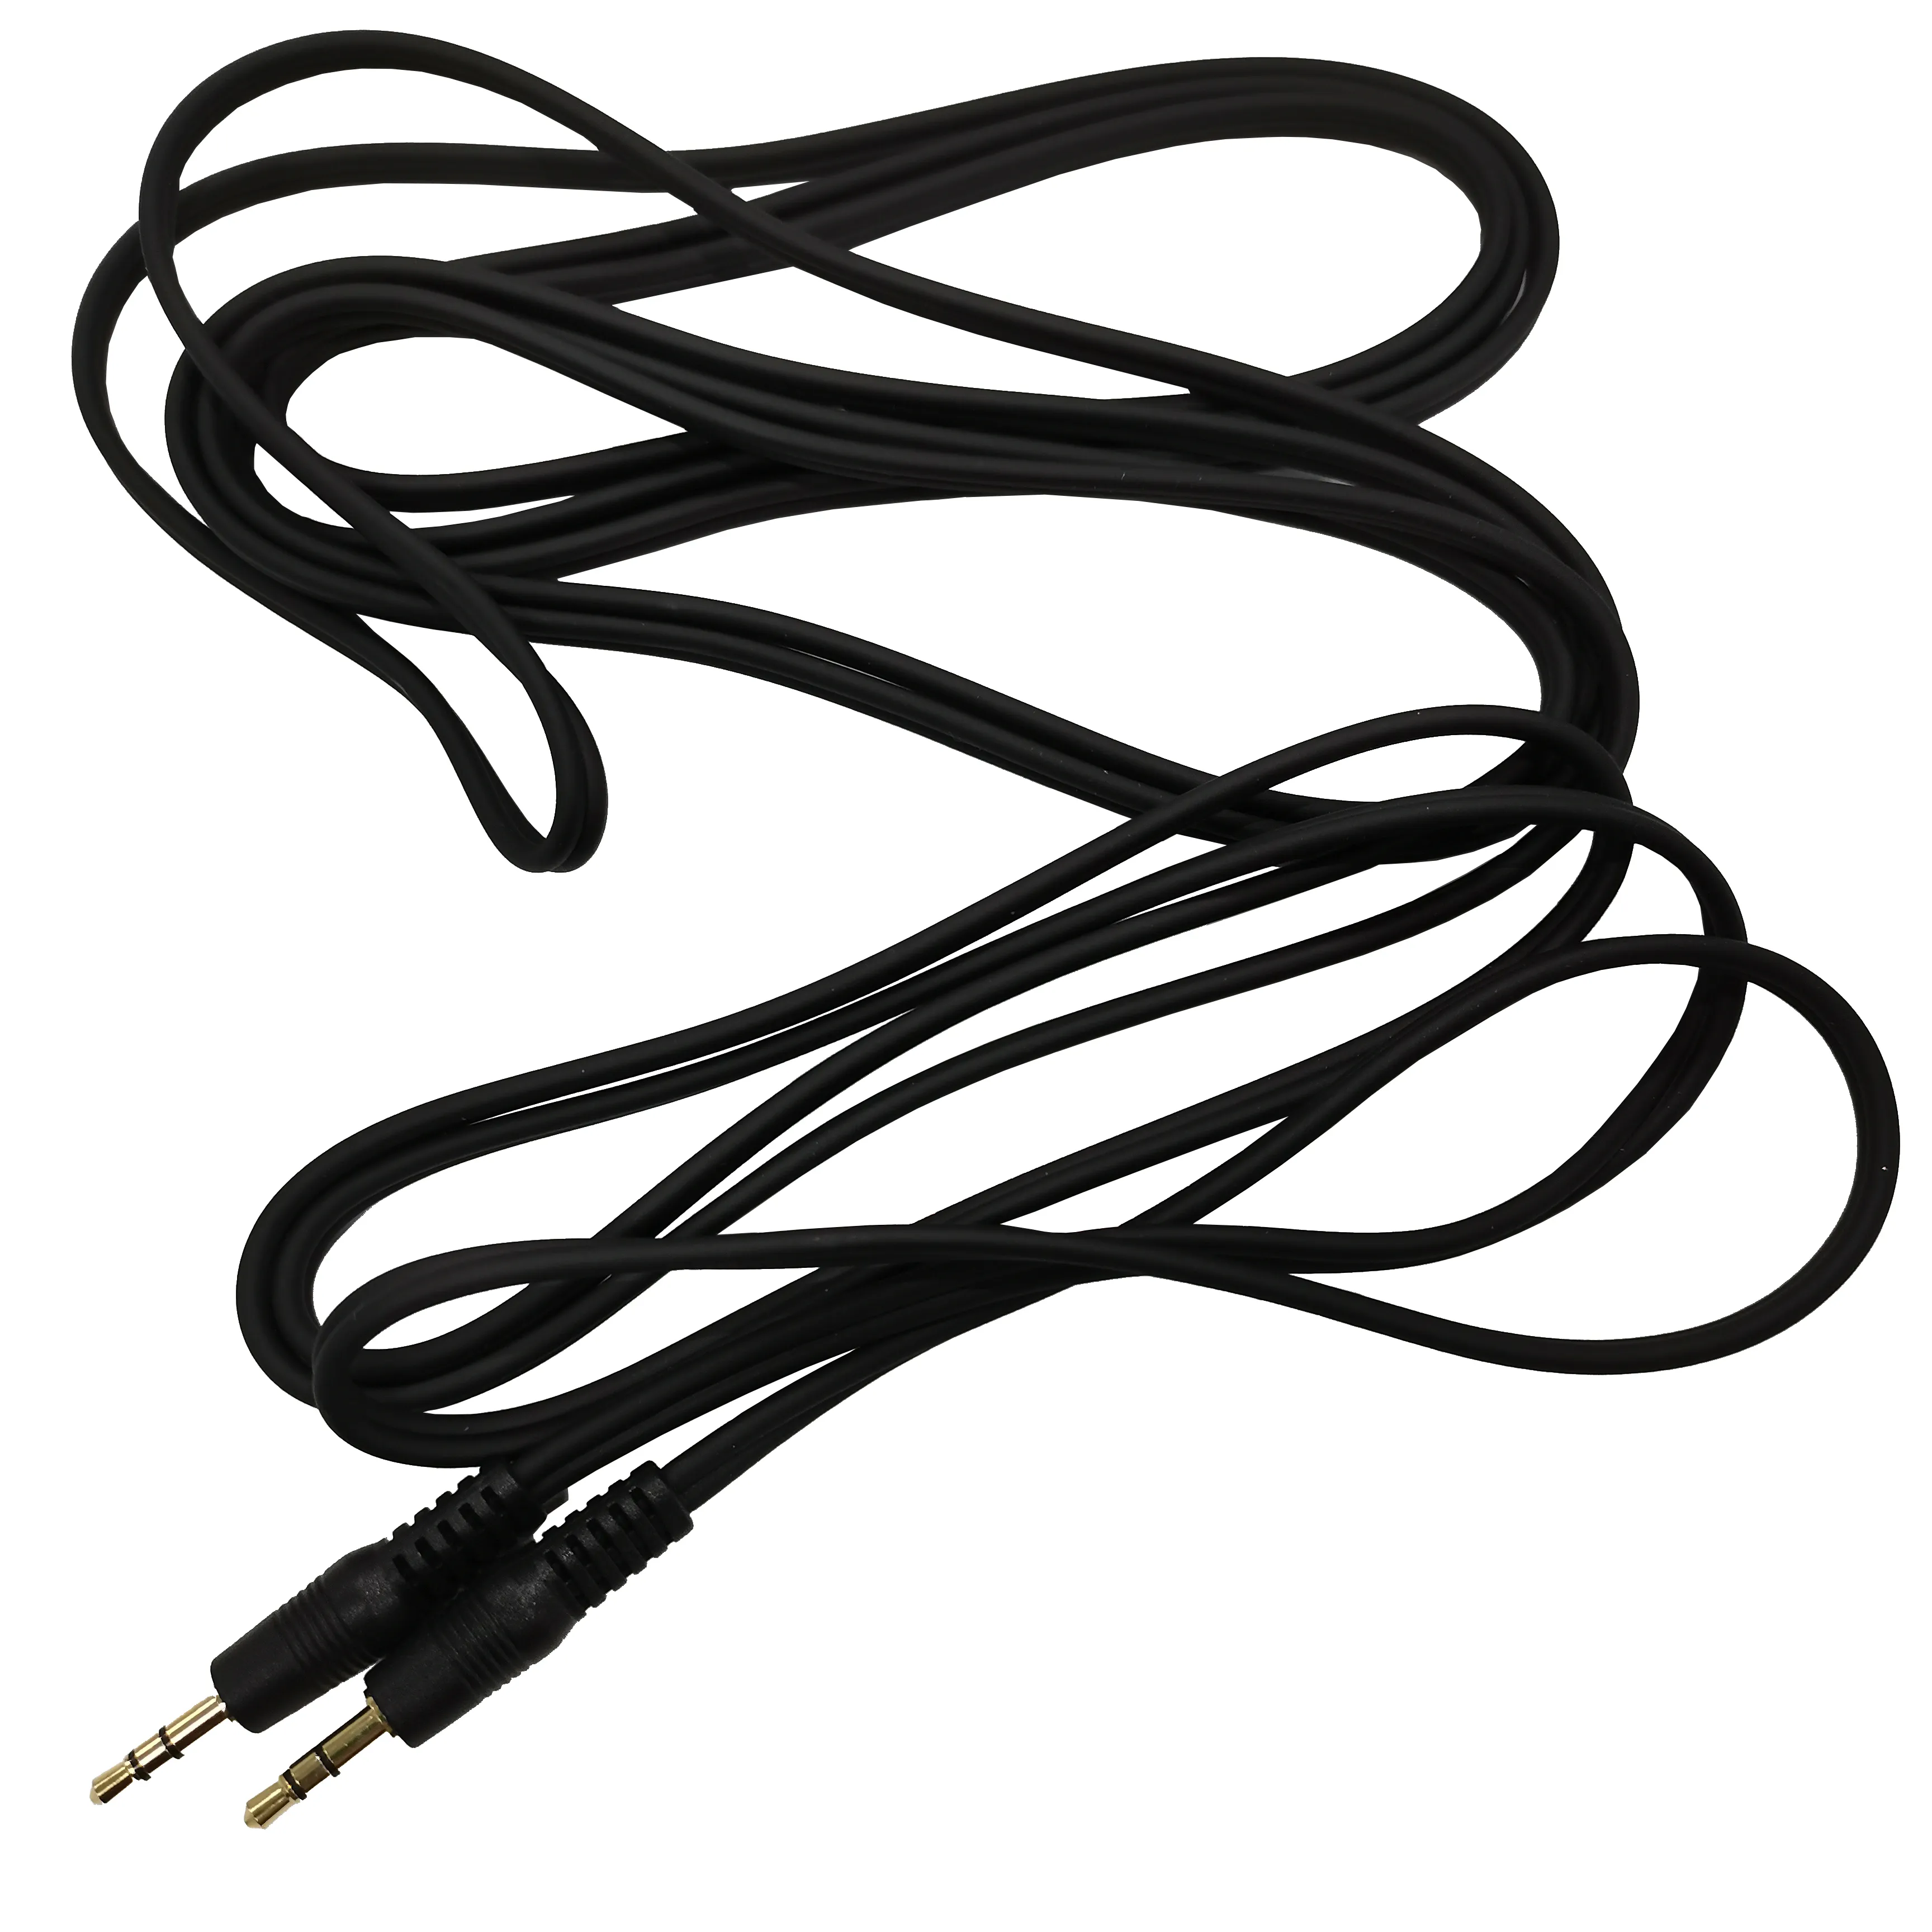 Cable Usb 3.5mm Male To 3.5mm Male Earphone Jack Audio Splitter Earphones Cable 3.5mm Car Audio Adapter Cable